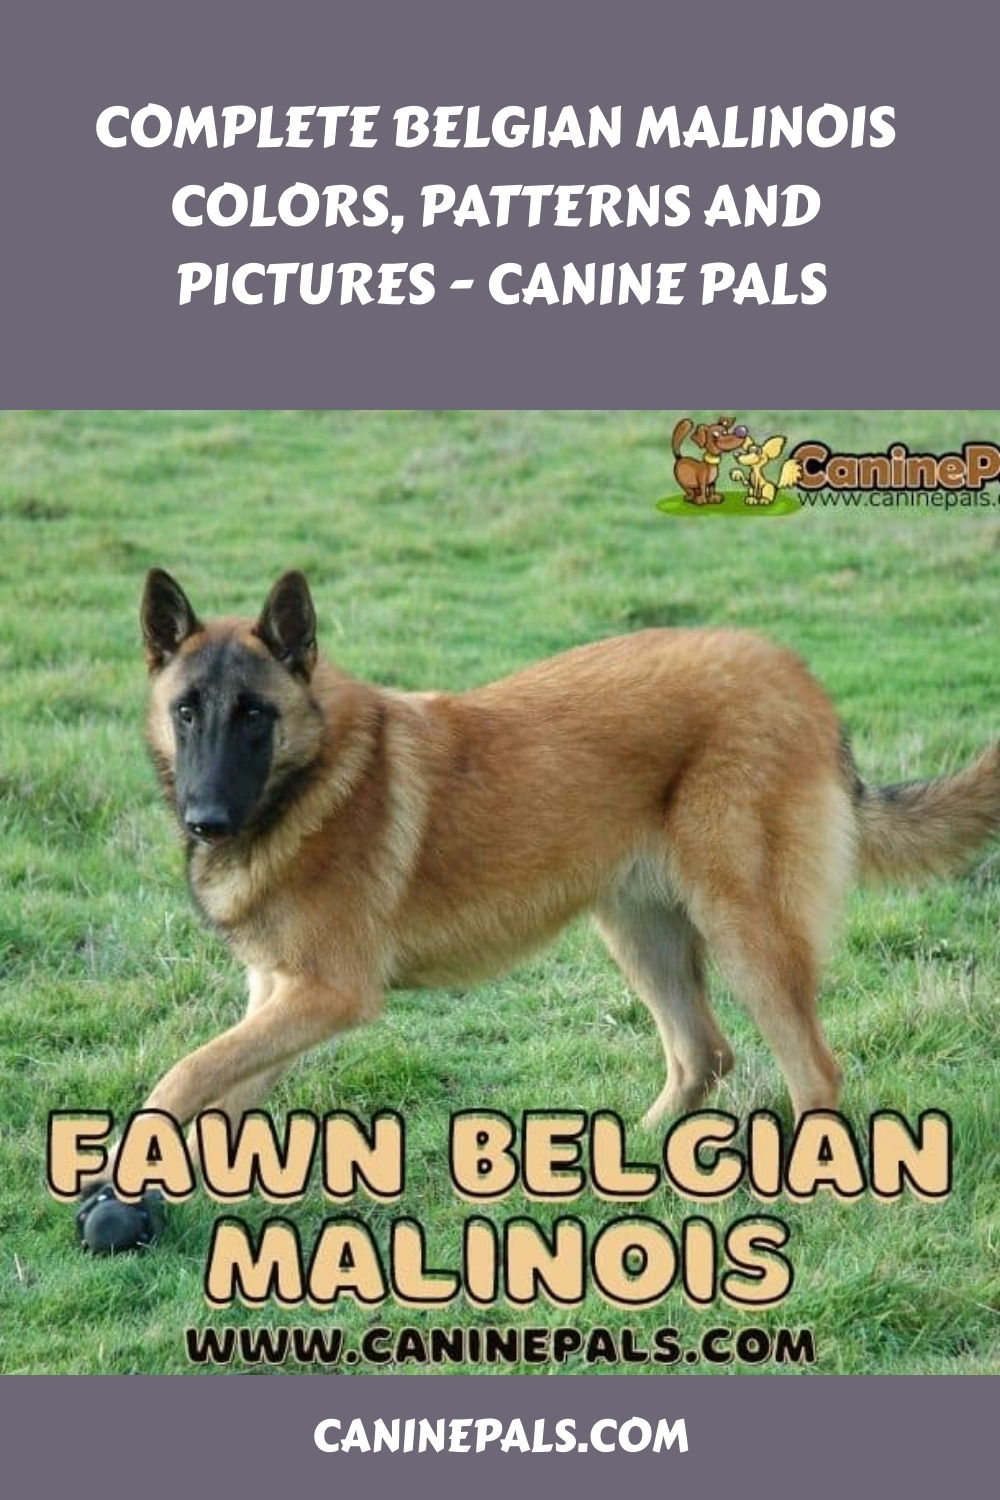 Complete Belgian Malinois Colors, Patterns and Pictures